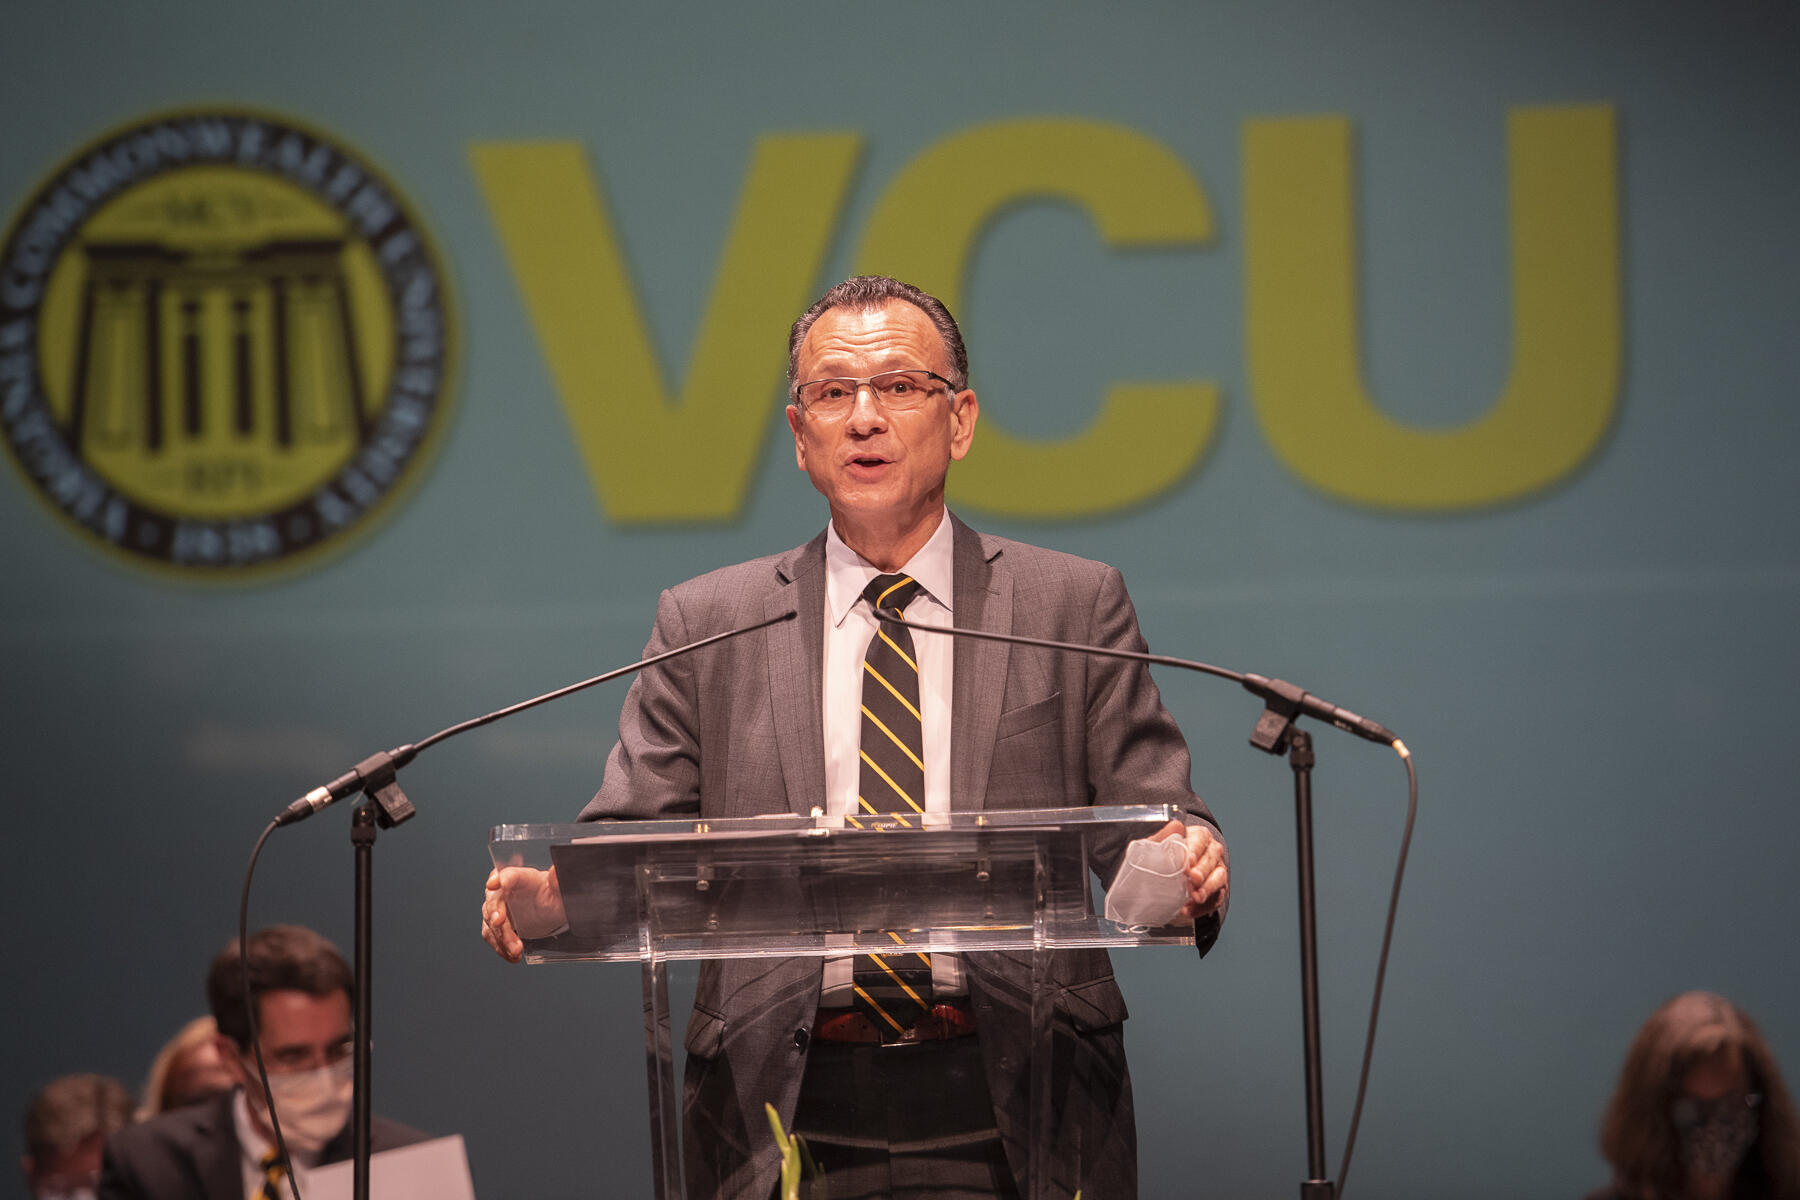 Fotis Sotiropoulos, VCU provost and senior vice president for academic affairs, addresses attendees at VCU's annual faculty convocation event. 